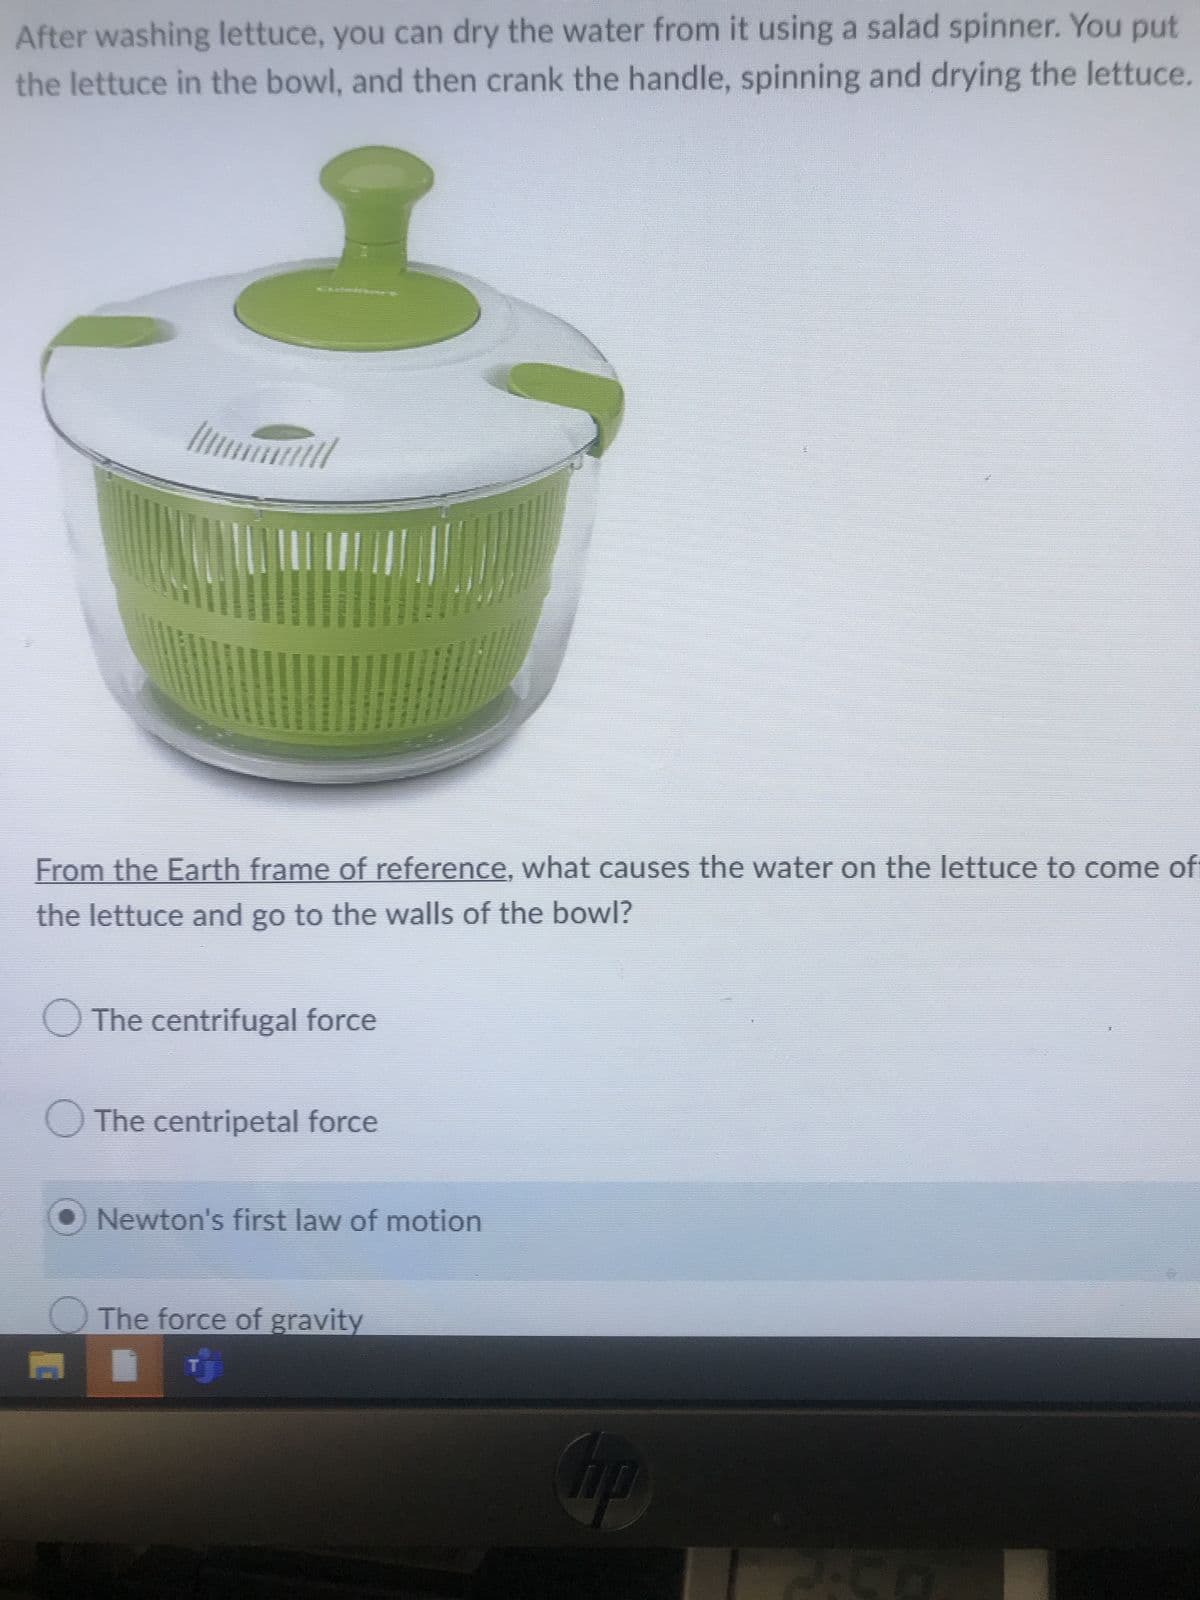 After washing lettuce, you can dry the water from it using a salad spinner. You put
the lettuce in the bowl, and then crank the handle, spinning and drying the lettuce.
From the Earth frame of reference, what causes the water on the lettuce to come ofi
the lettuce and go to the walls of the bowl?
The centrifugal force
The centripetal force
Newton's first law of motion
The force of gravity
S